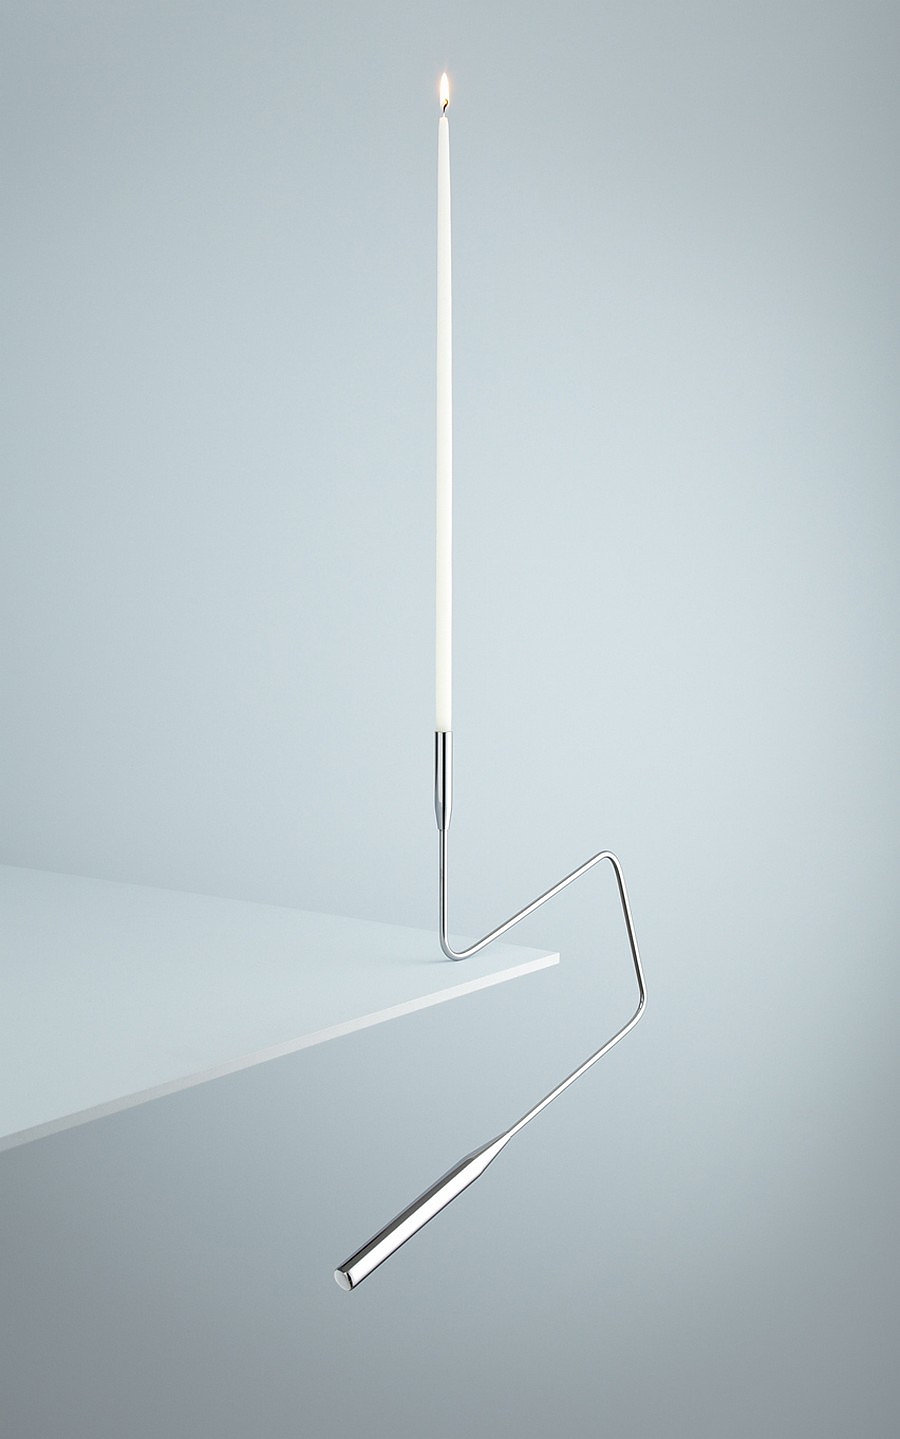 Poise Counterweighted Candelabra by Two Create.